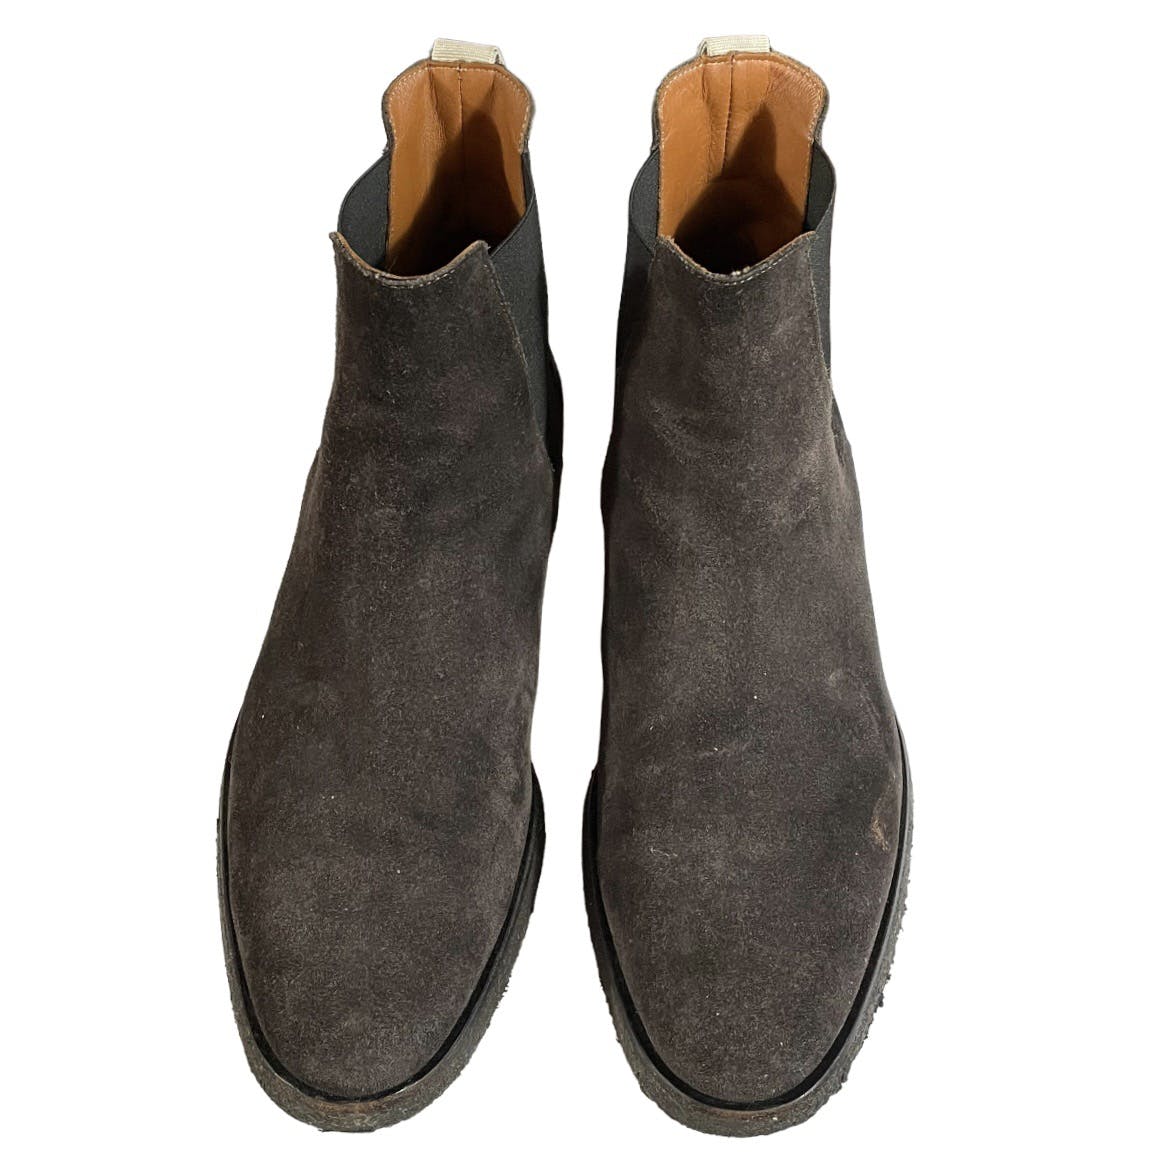 Suede Ankle Chelsea Boots - 3